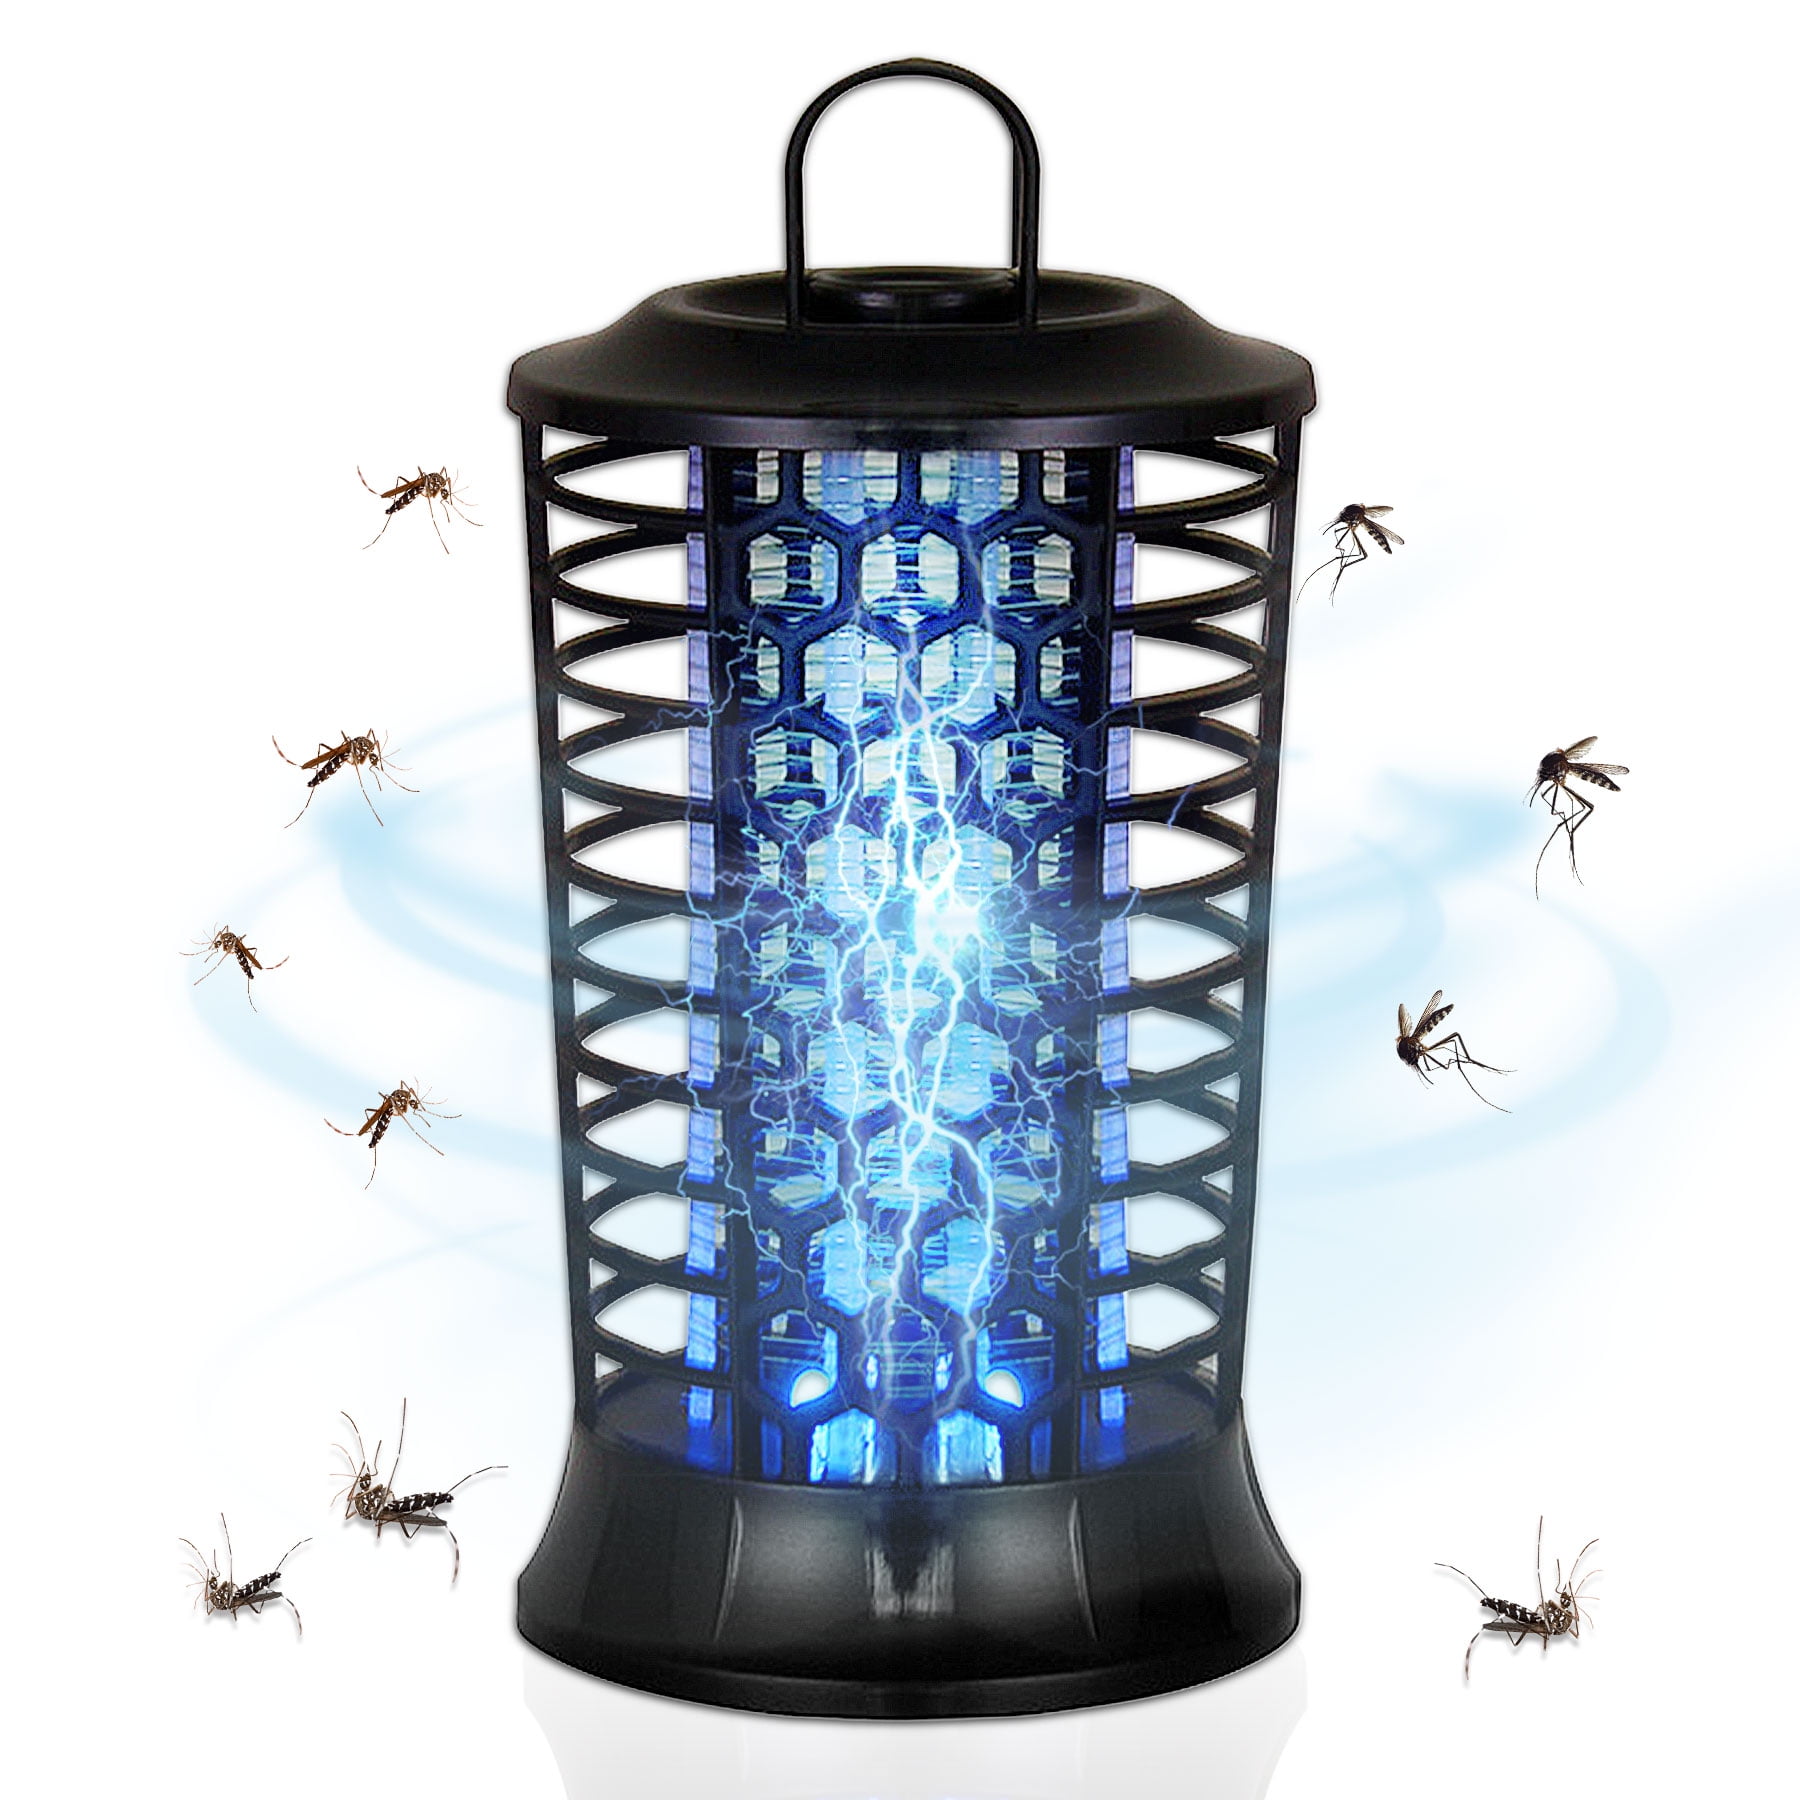  Katchy Indoor Insect Trap - Catcher & Killer for Mosquitos,  Gnats, Moths, Fruit Flies - Non-Zapper Traps for Inside Your Home - Catch  Insects Indoors with Suction, Bug Light 